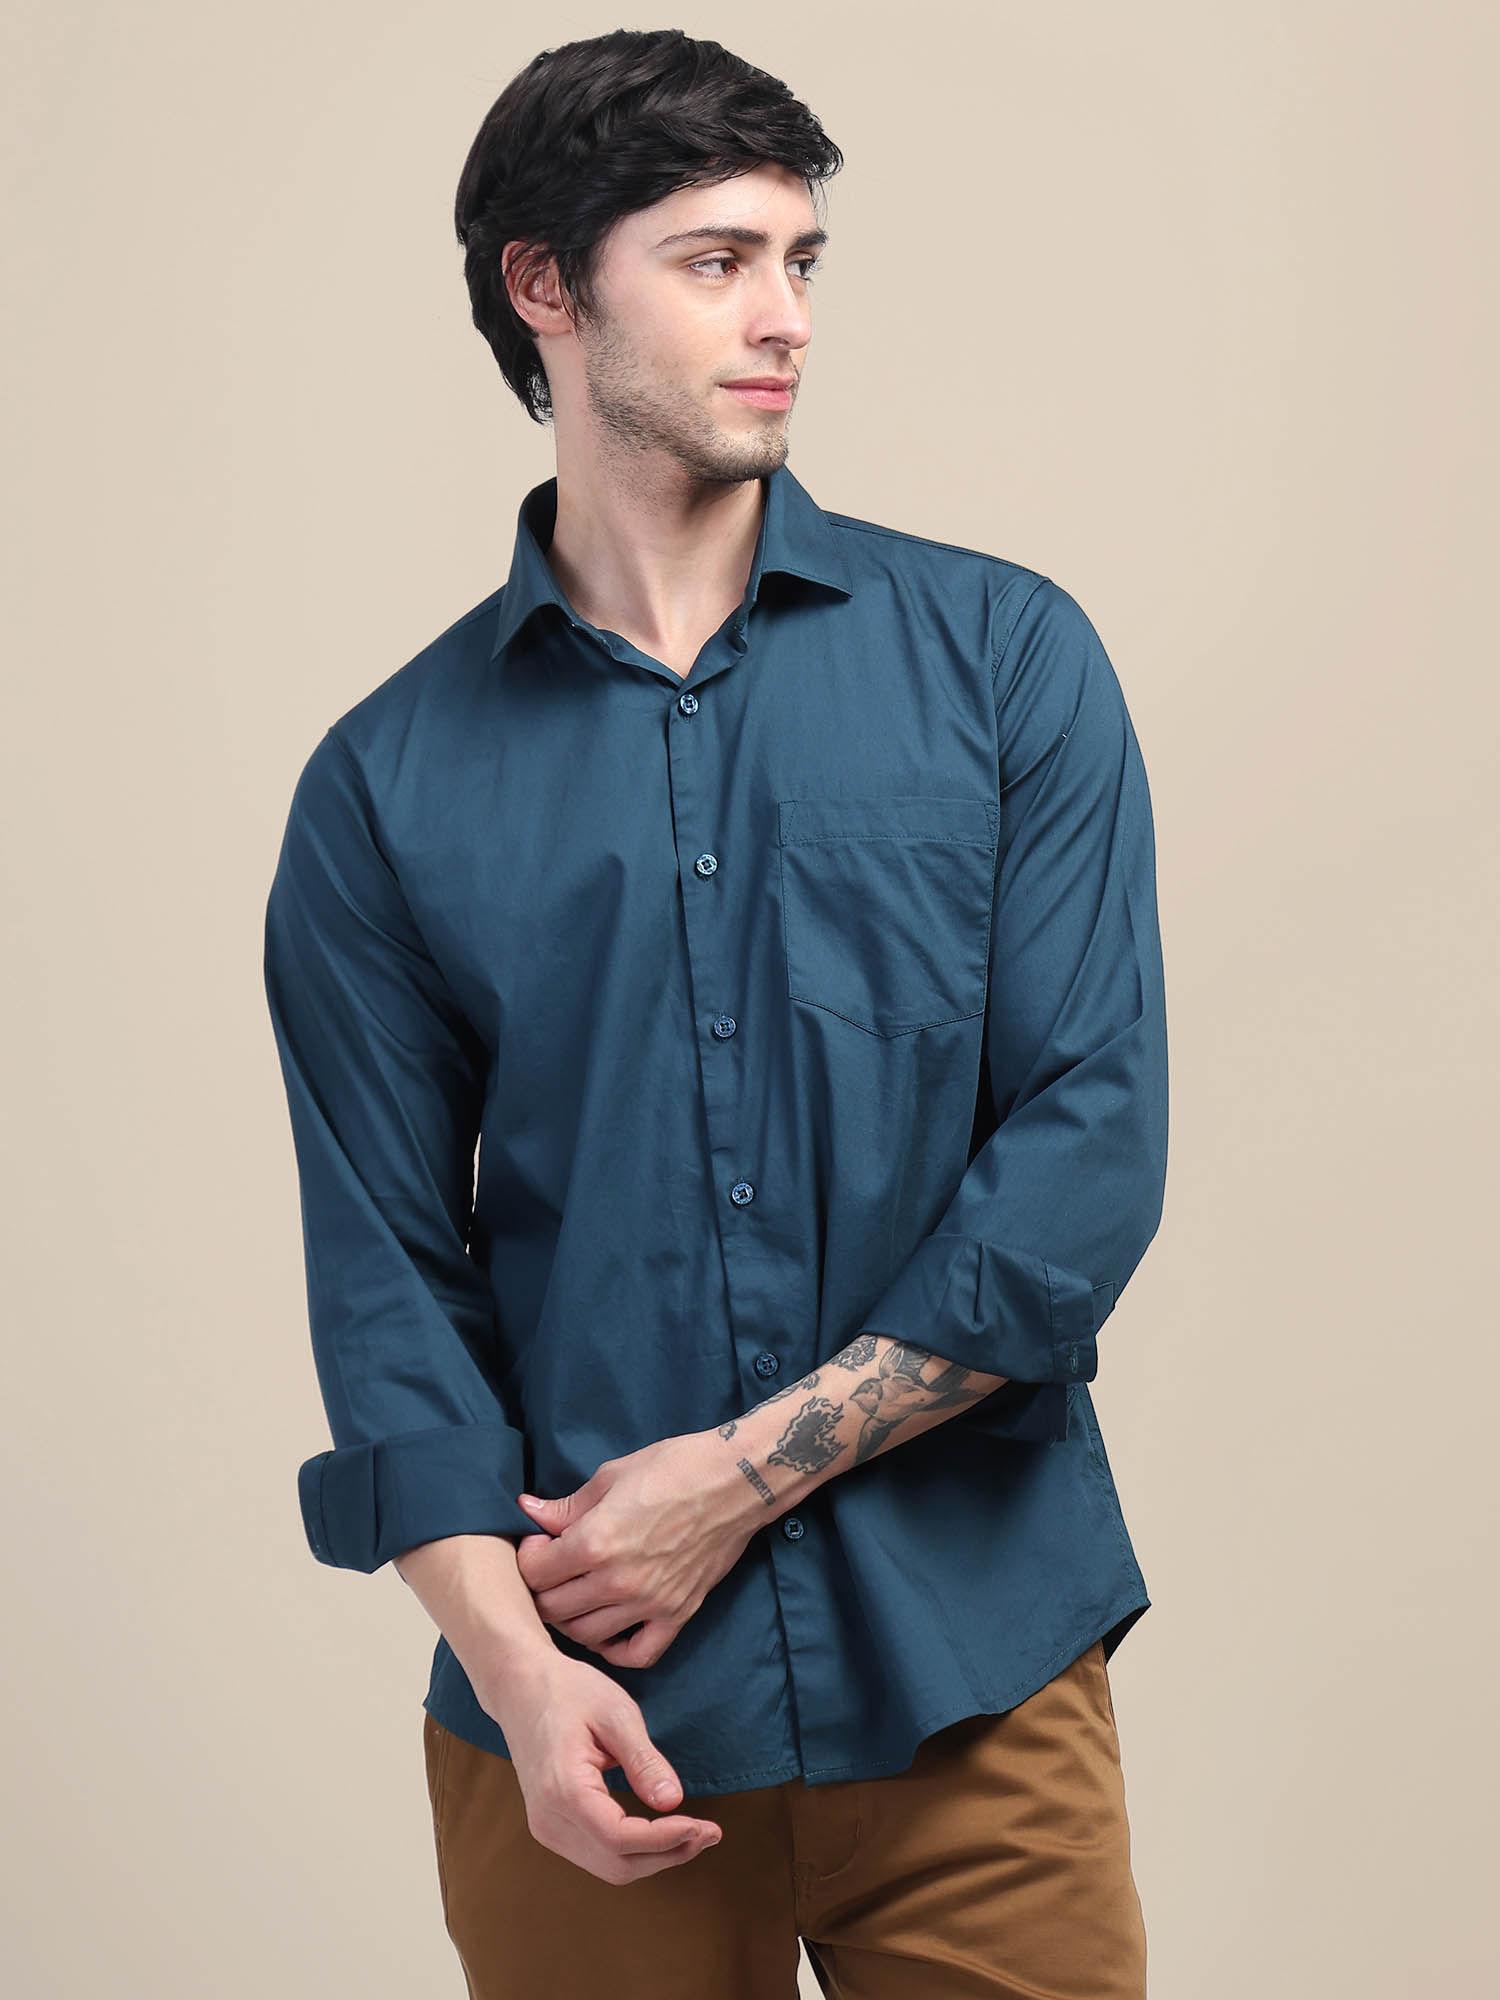 teal green casual shirt for men with regular fit and solid design